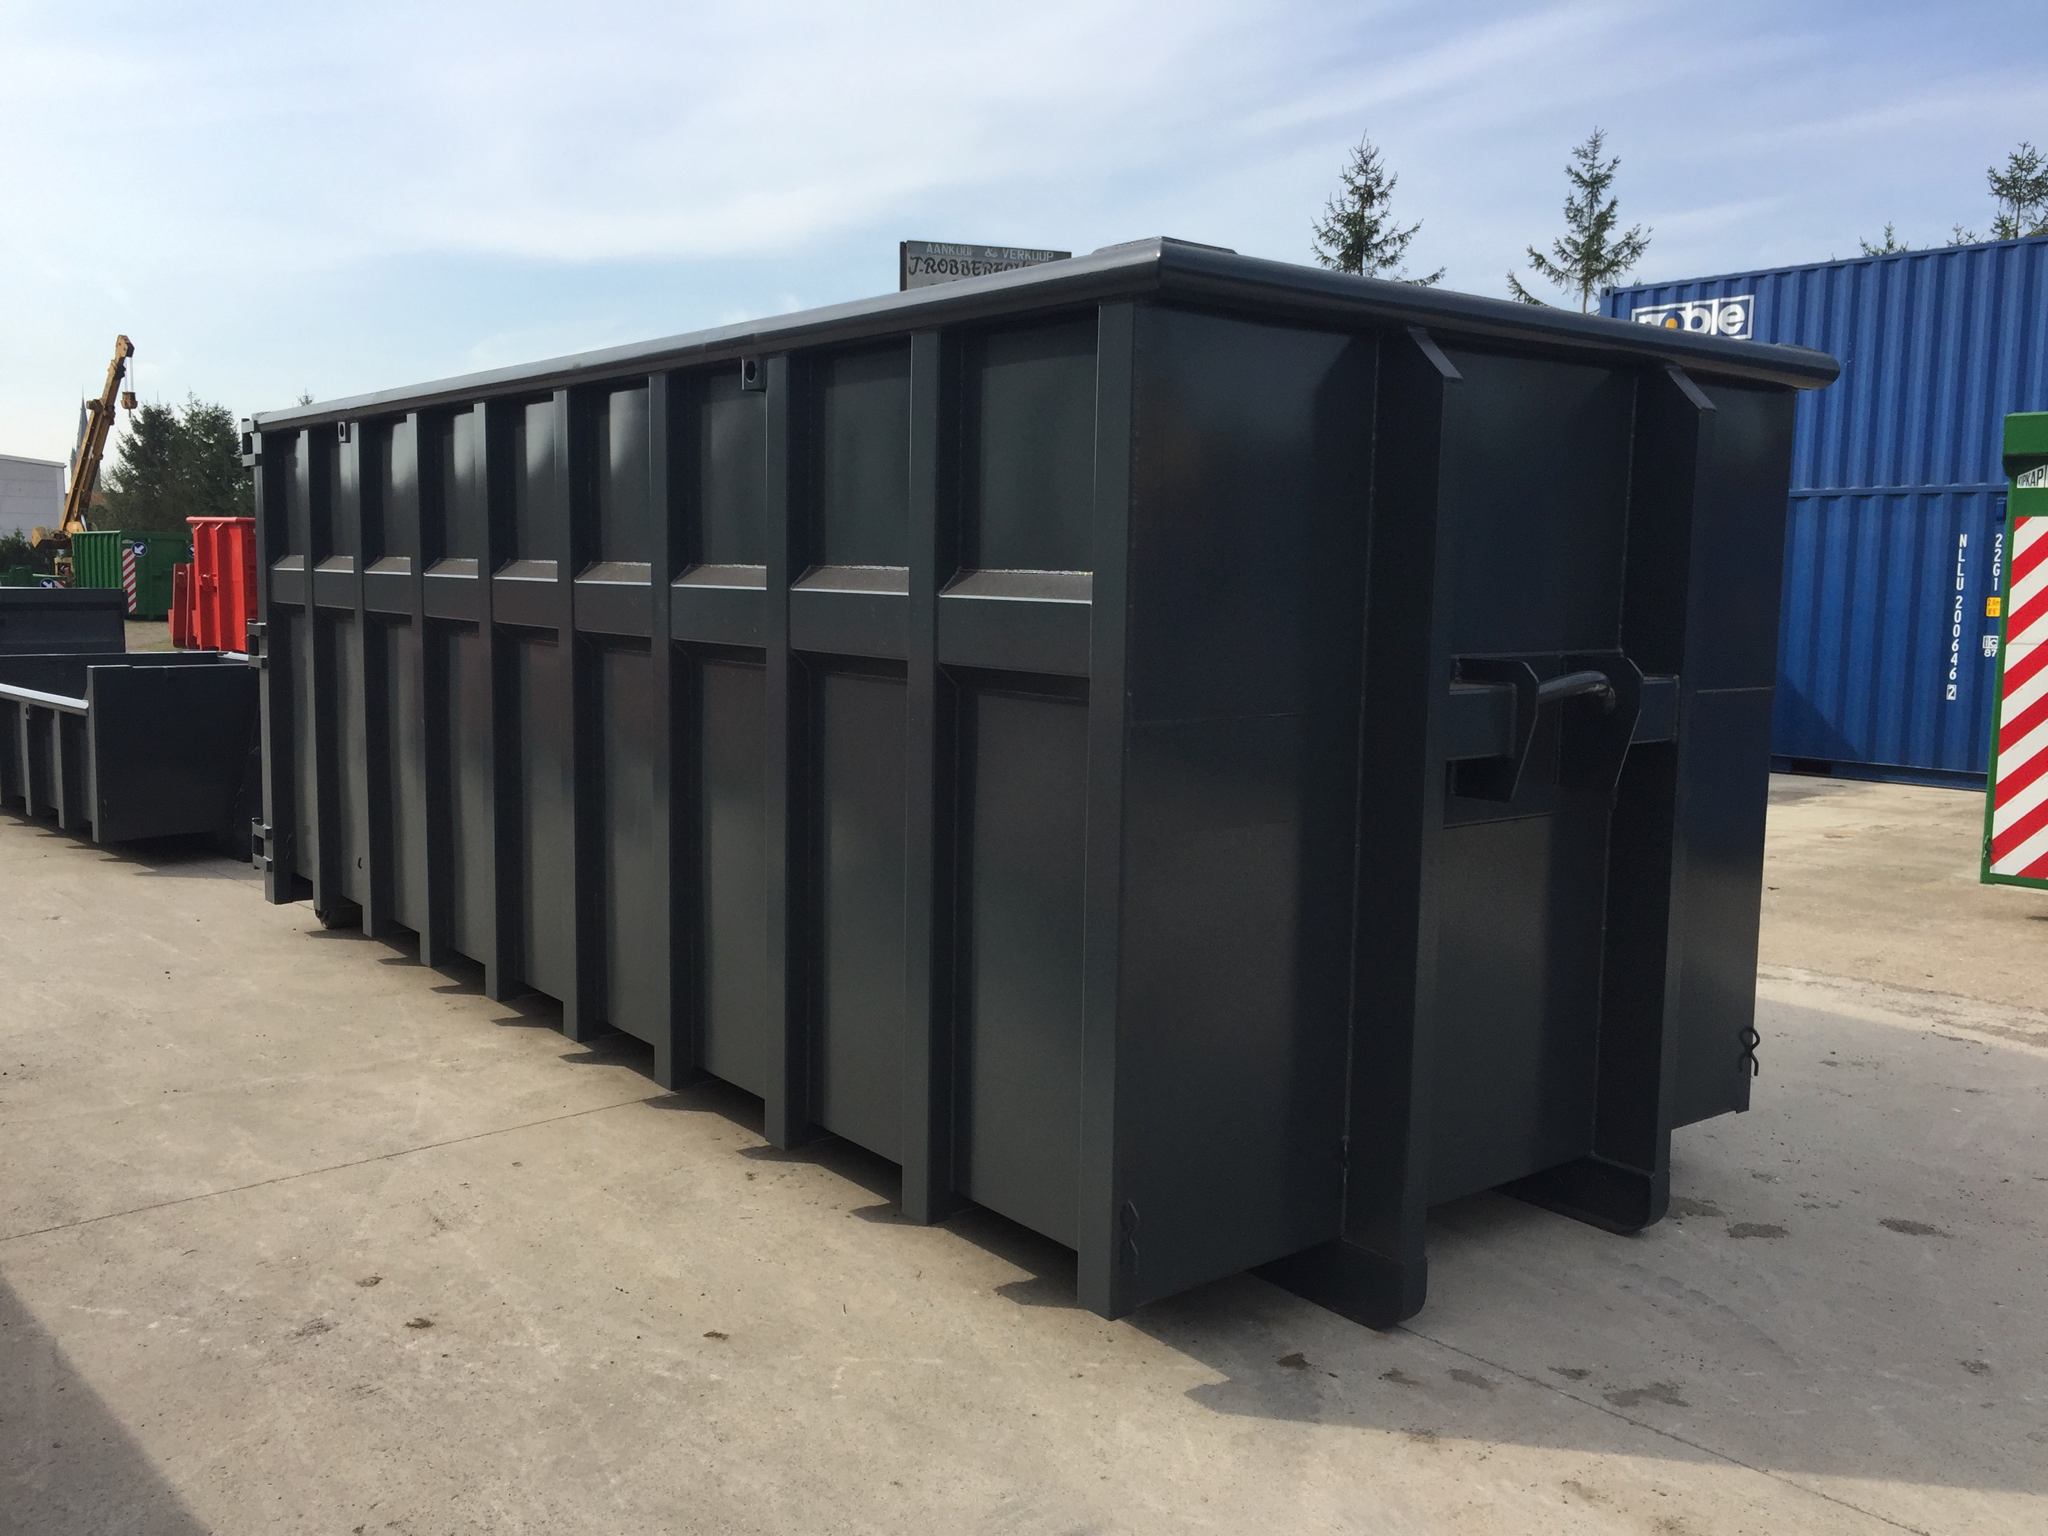  30m³ Tyfon afvalcontainer